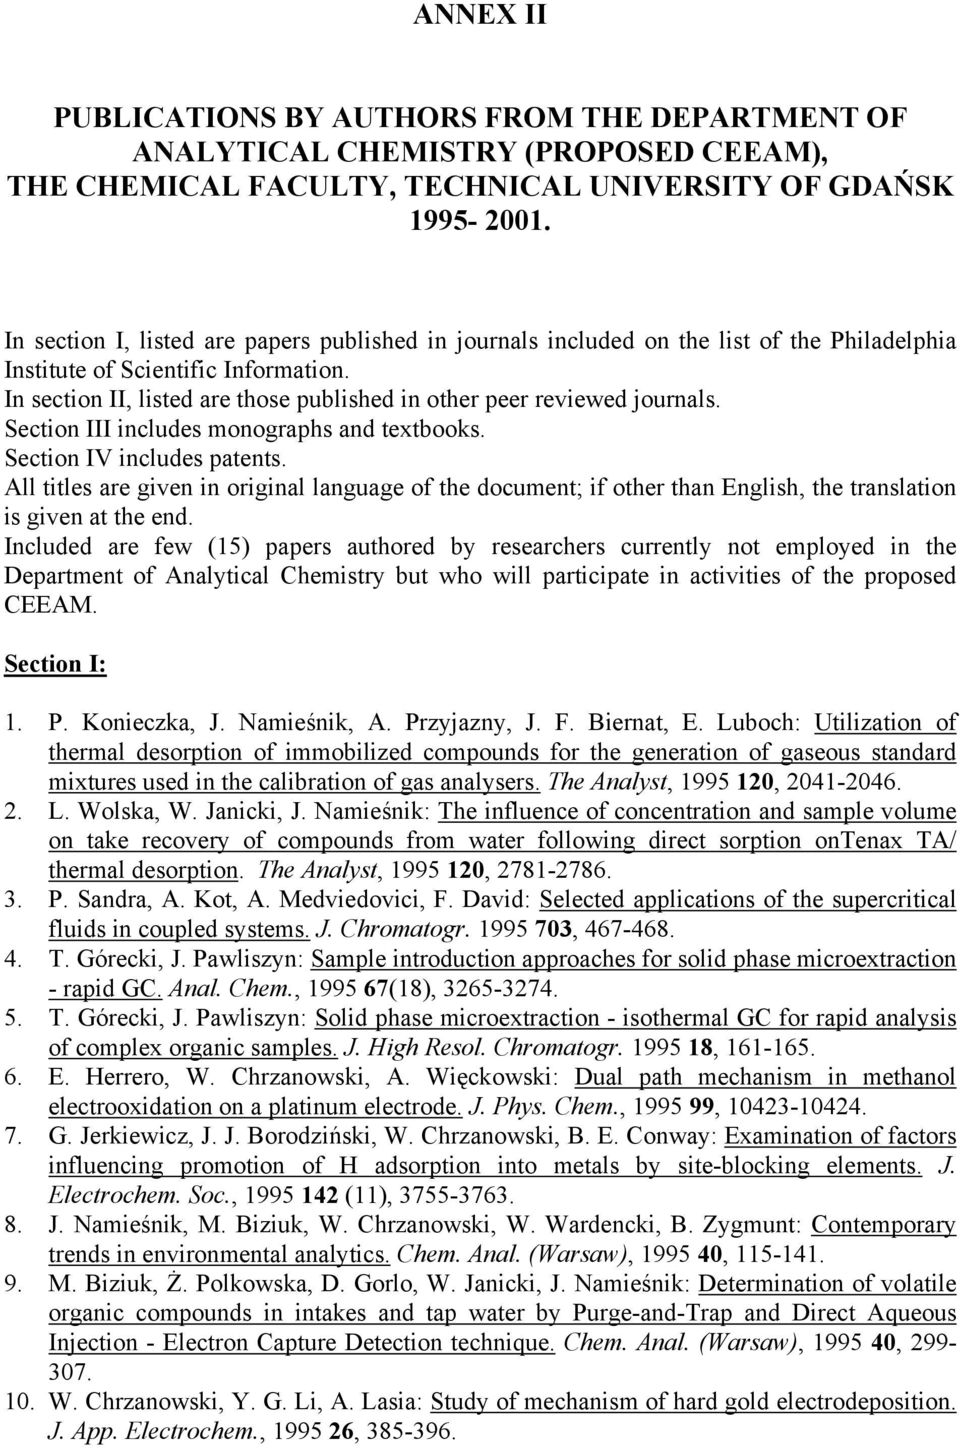 In section II, listed are those published in other peer reviewed journals. Section III includes monographs and textbooks. Section IV includes patents.